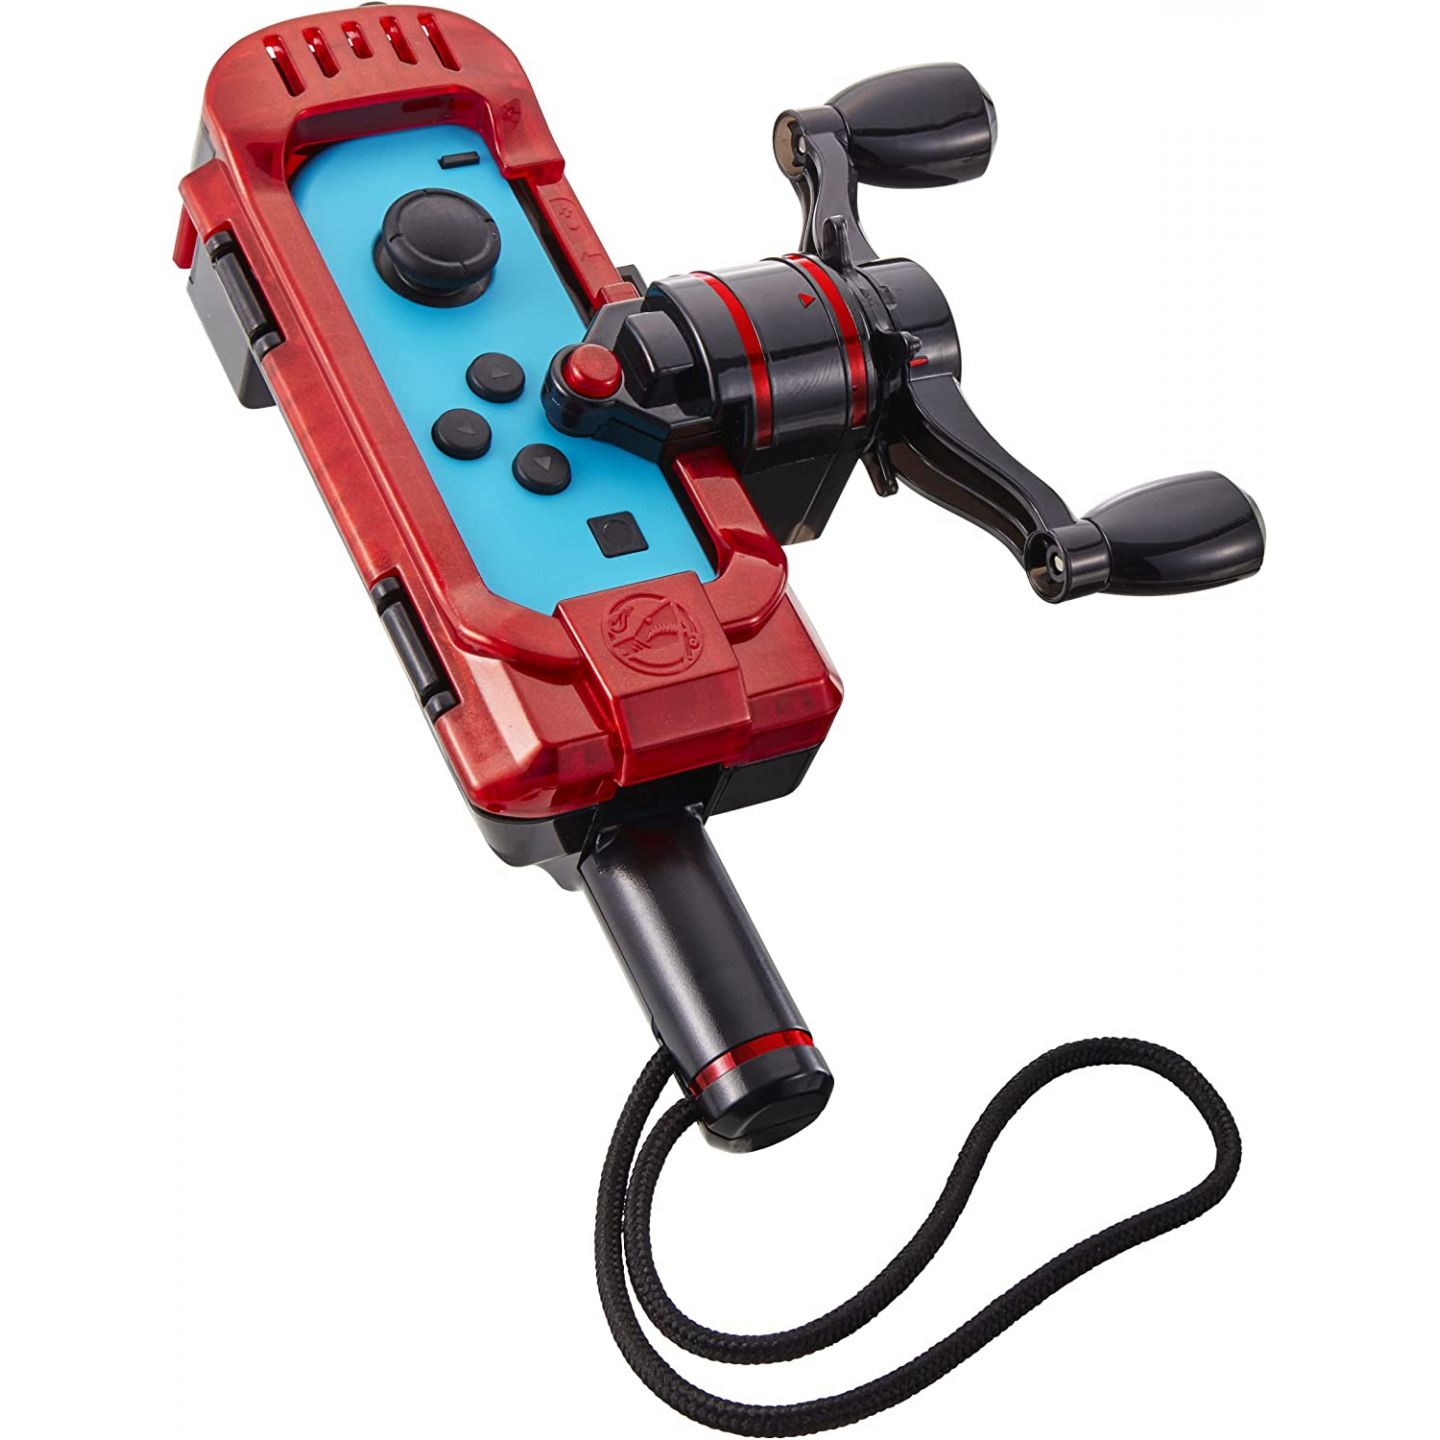 Ace Angler: Fishing Spirits Rod Controller for Nintendo Switch [RED  EDITION]